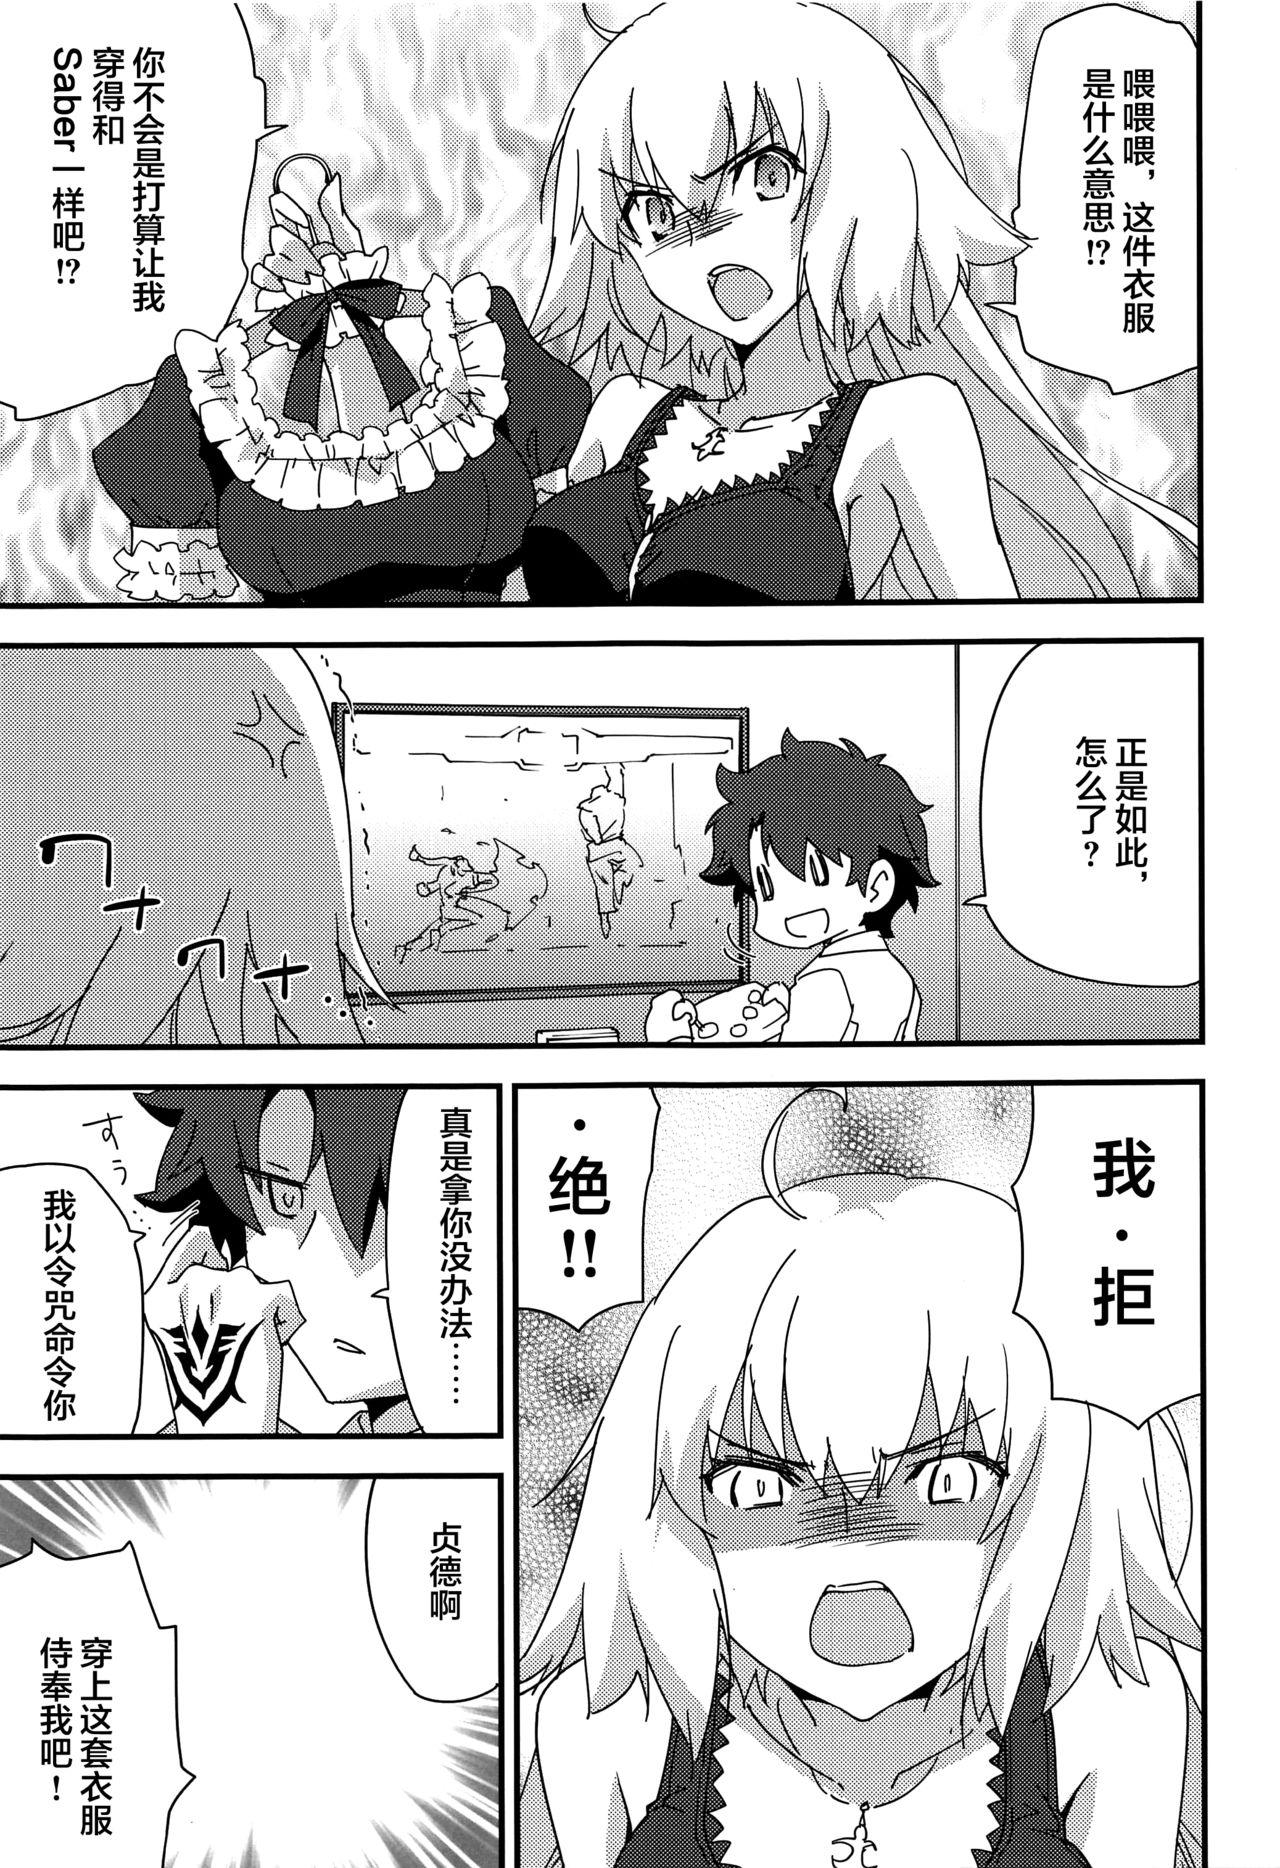 Assfuck Gohoushi Maid Jeanne-chan - Fate grand order Naked Women Fucking - Page 4